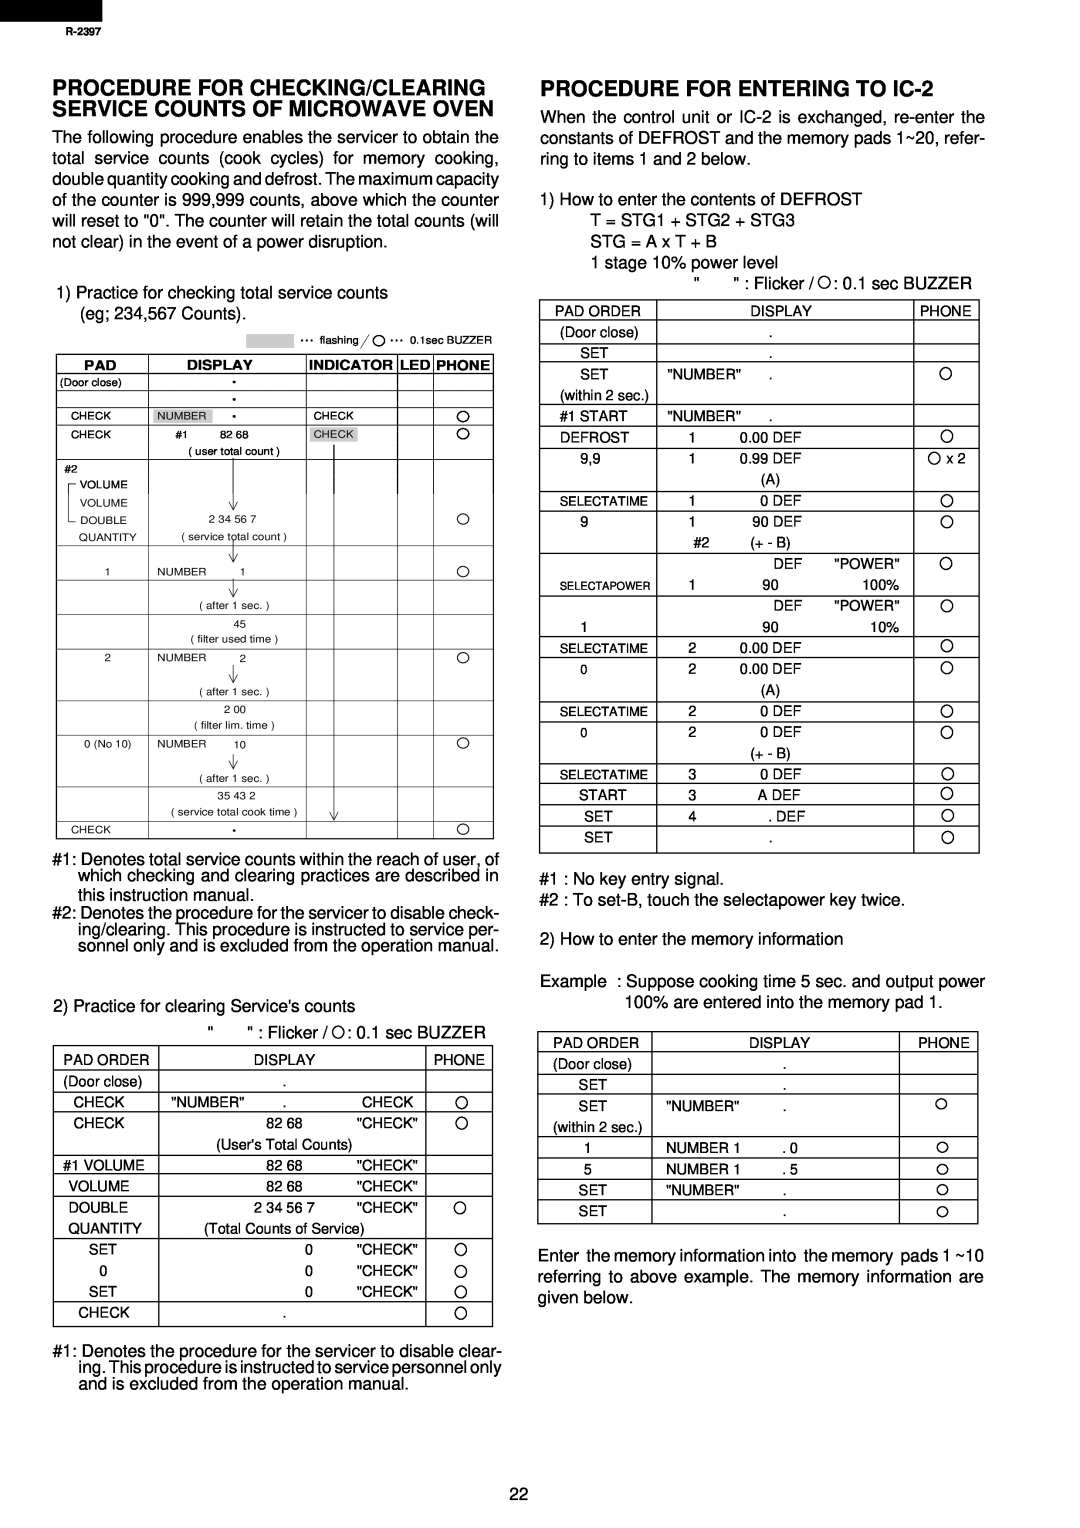 Sharp R-2397 service manual PROCEDURE FOR ENTERING TO IC-2 